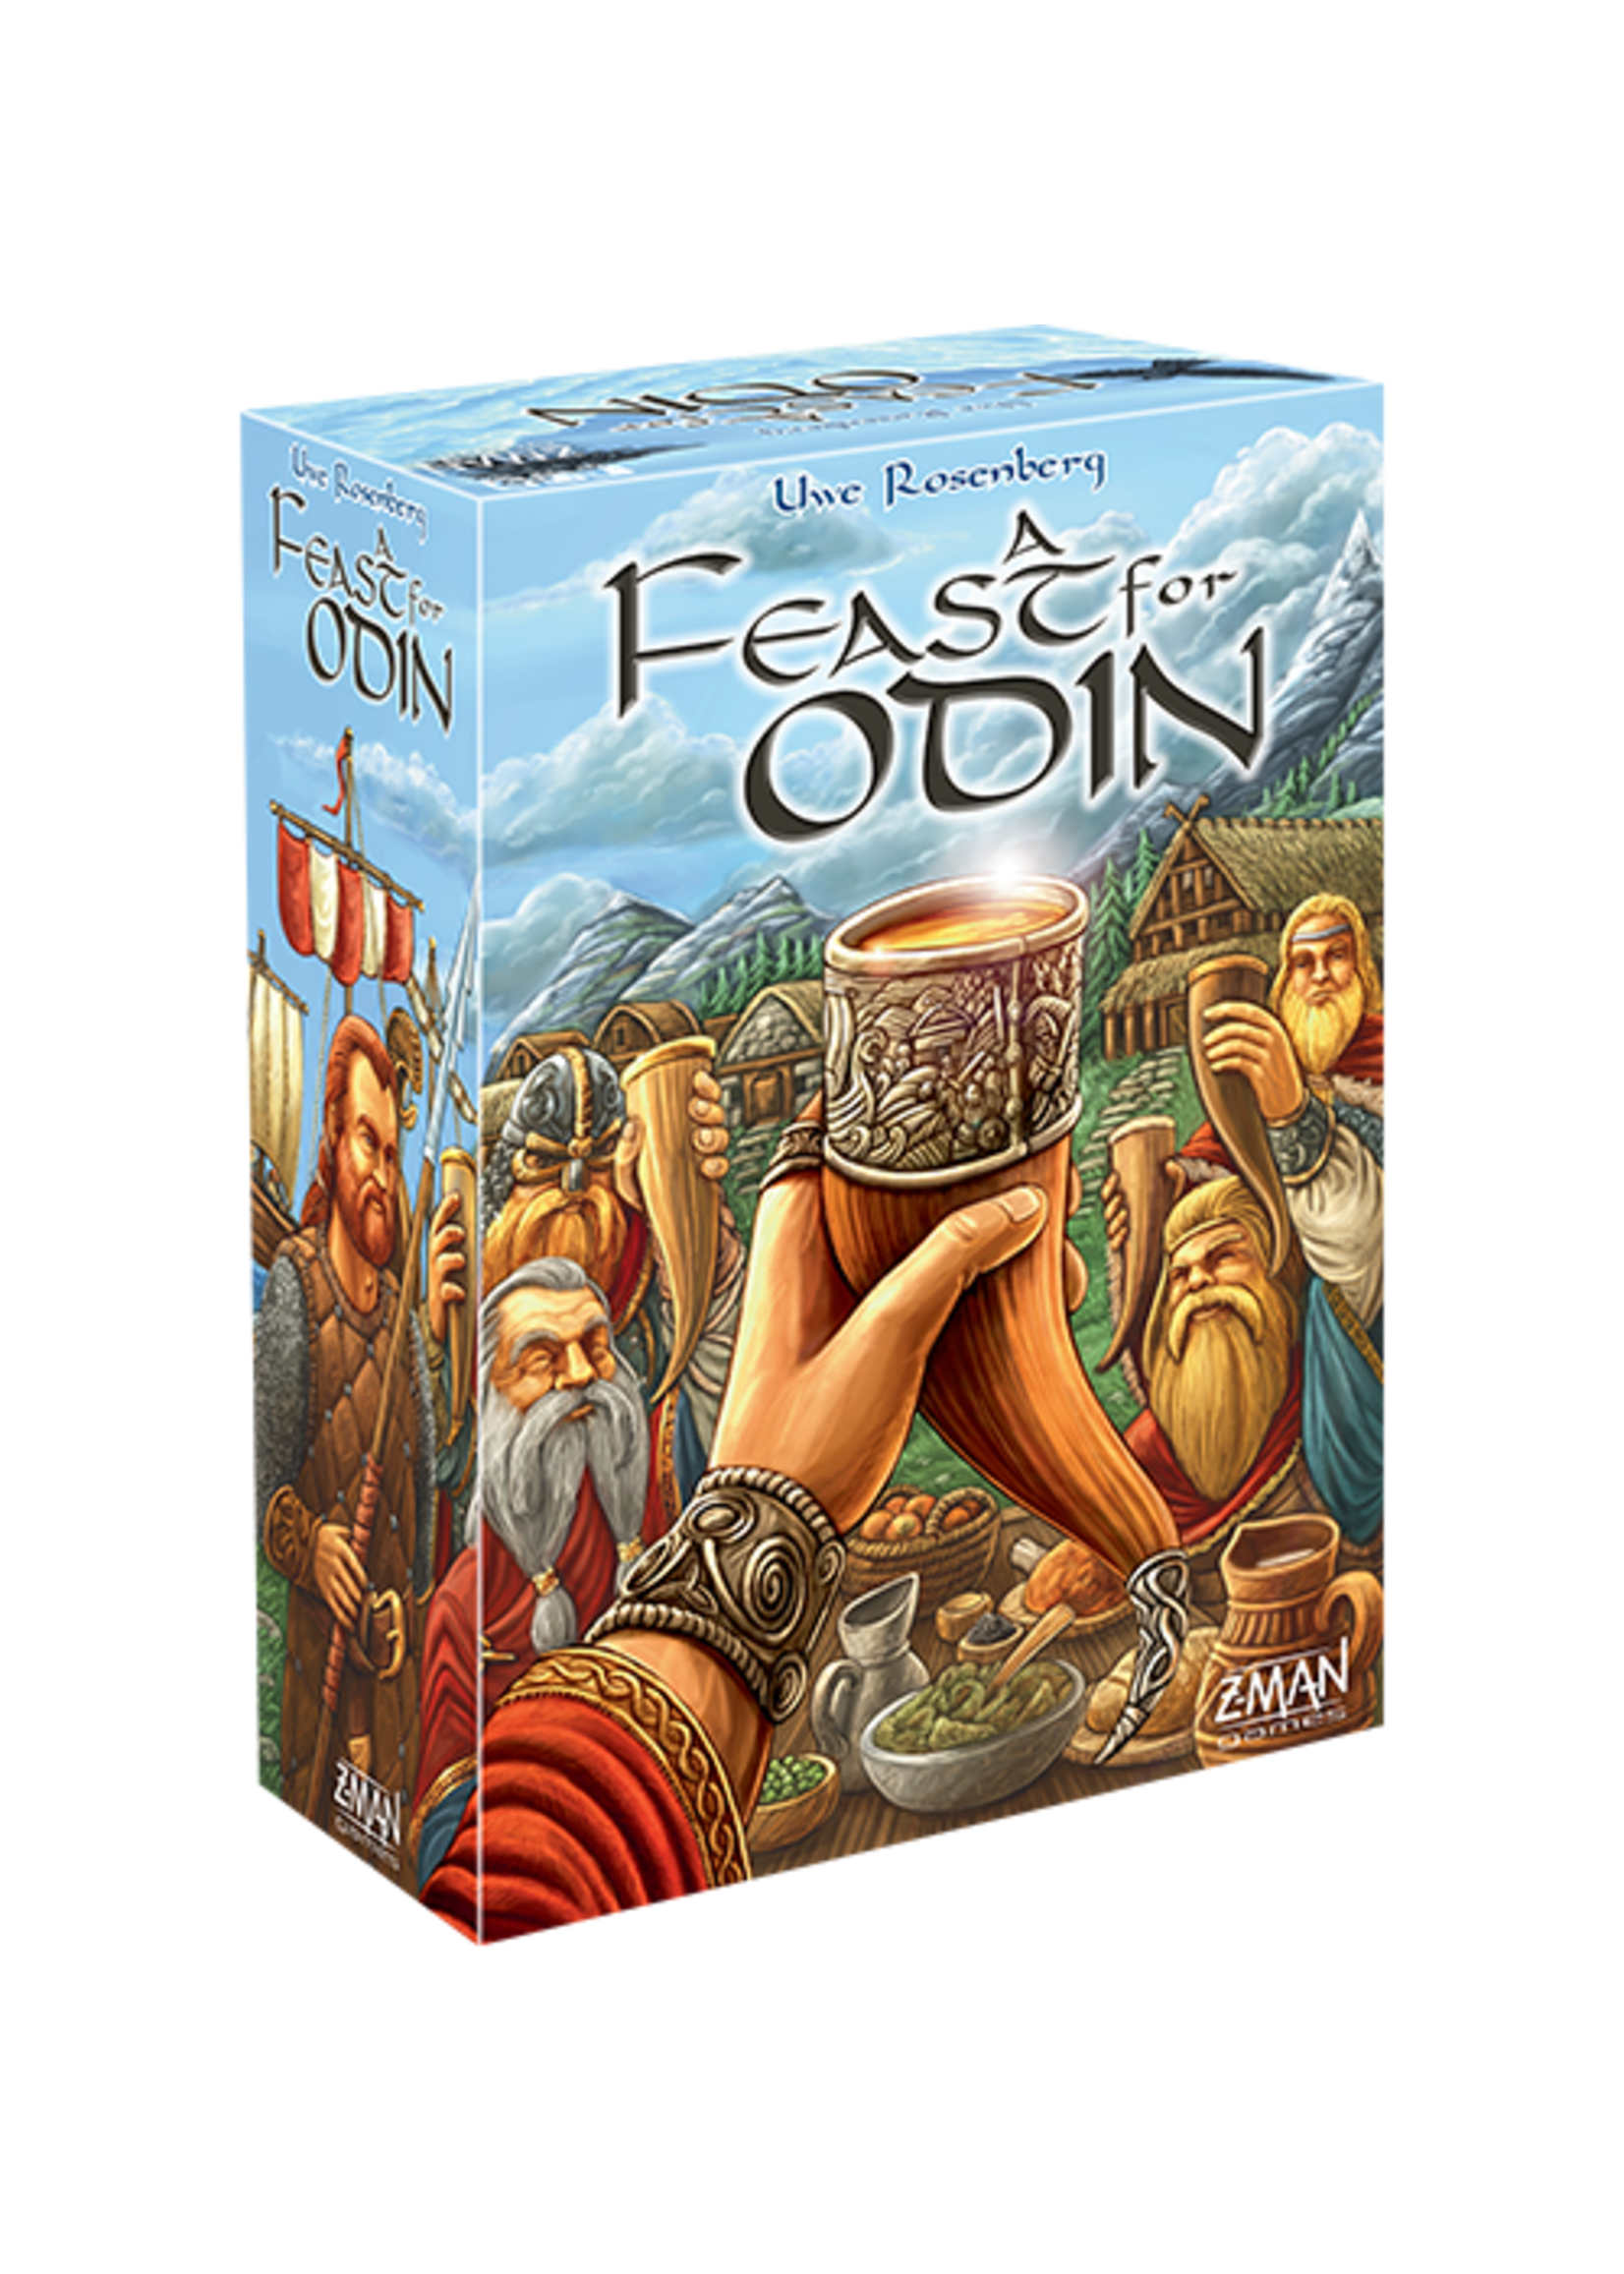 Z-Man Games A Feast for Odin